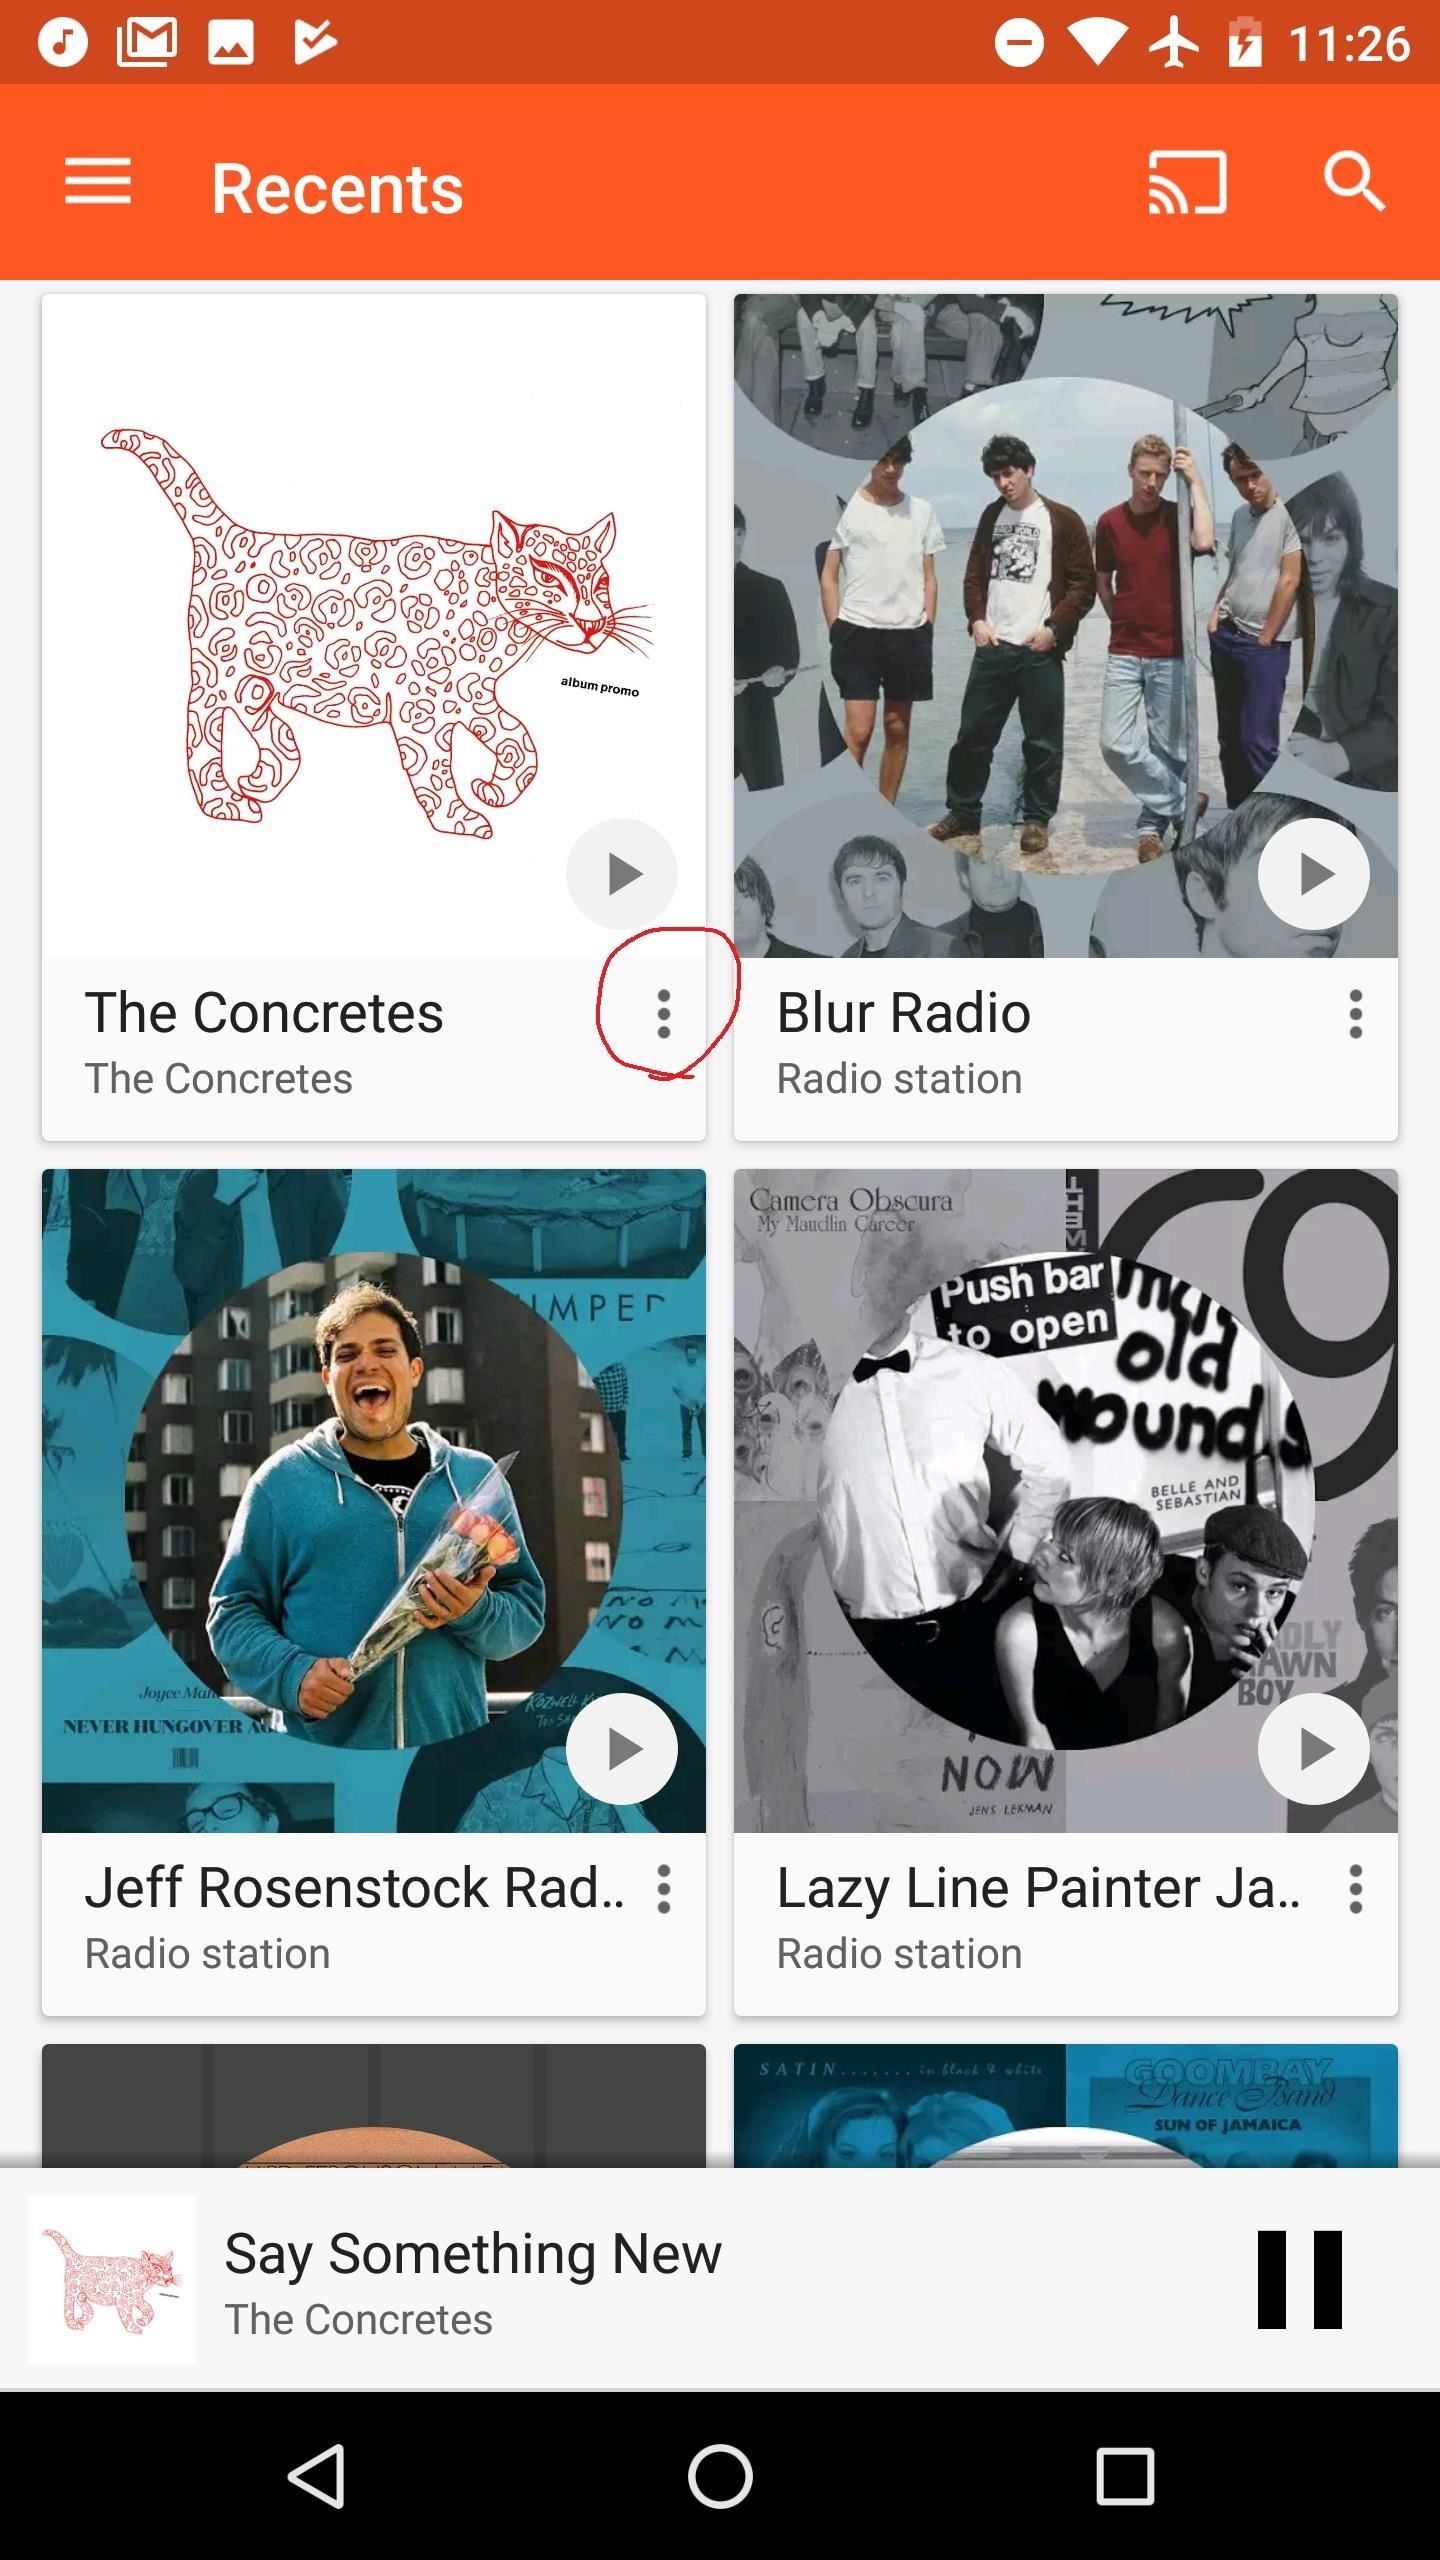 Google Play Music 101: Finding & Adding New Music to Your Library